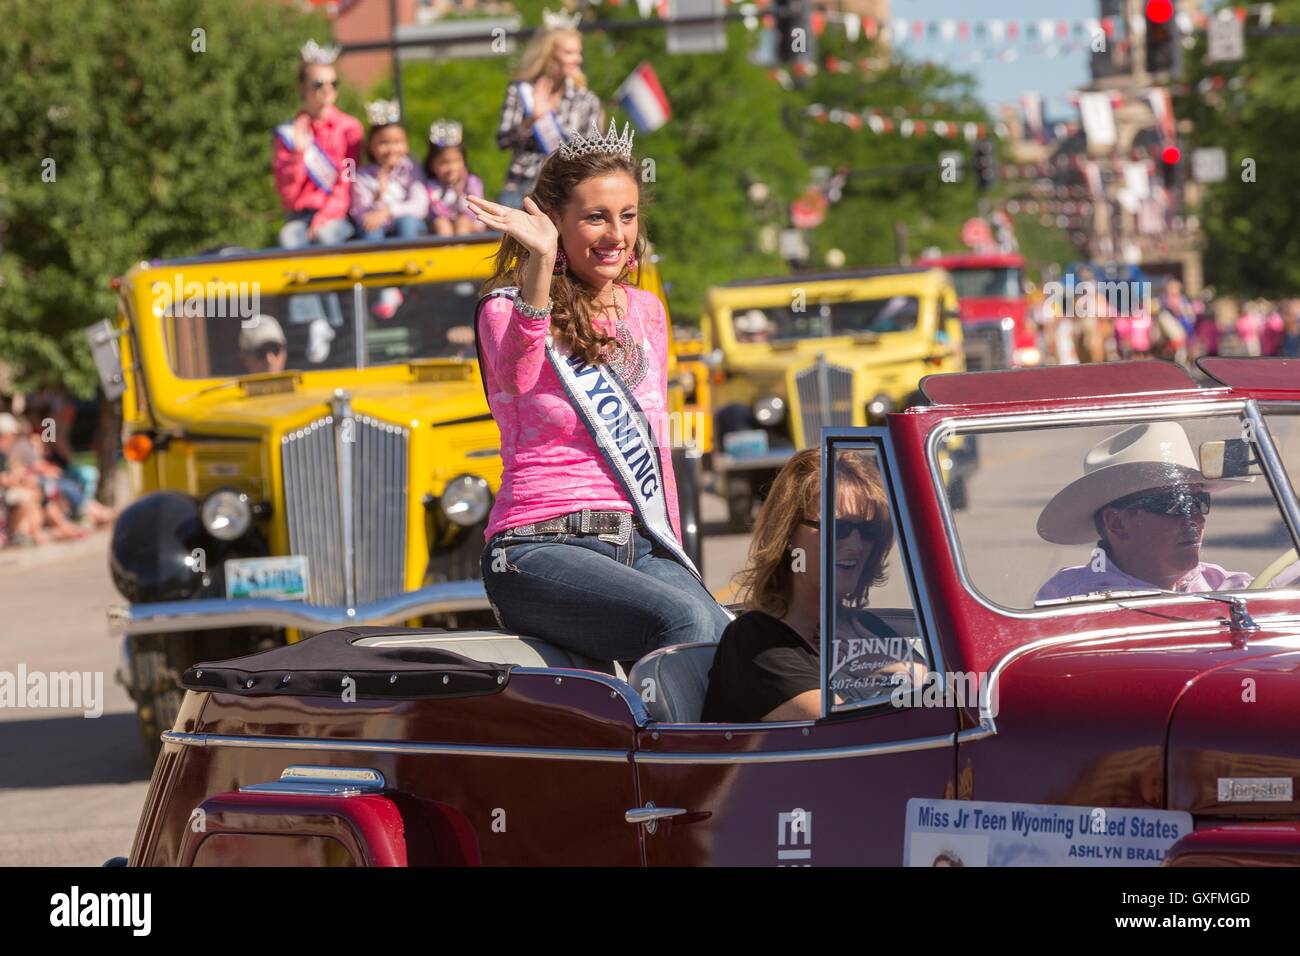 Beauty Queens wave from old buses during the Cheyenne Frontier Days parade past the state capital building July 23, 2015 in Cheyenne, Wyoming. Frontier Days celebrates the cowboy traditions of the west with a rodeo, parade and fair. Stock Photo